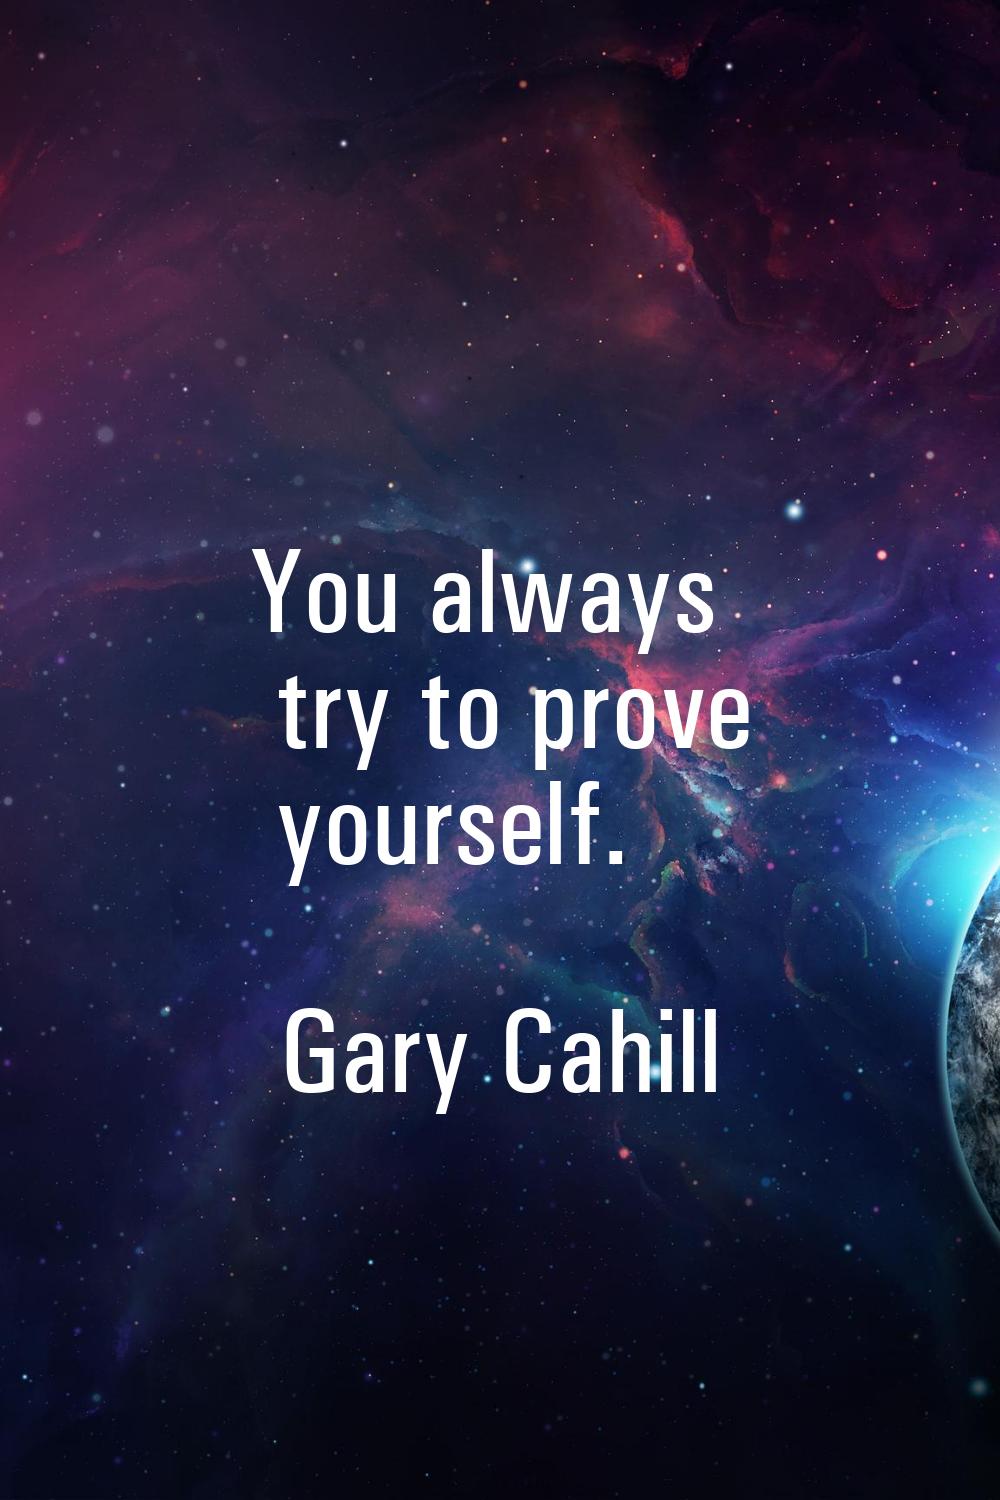 You always try to prove yourself.